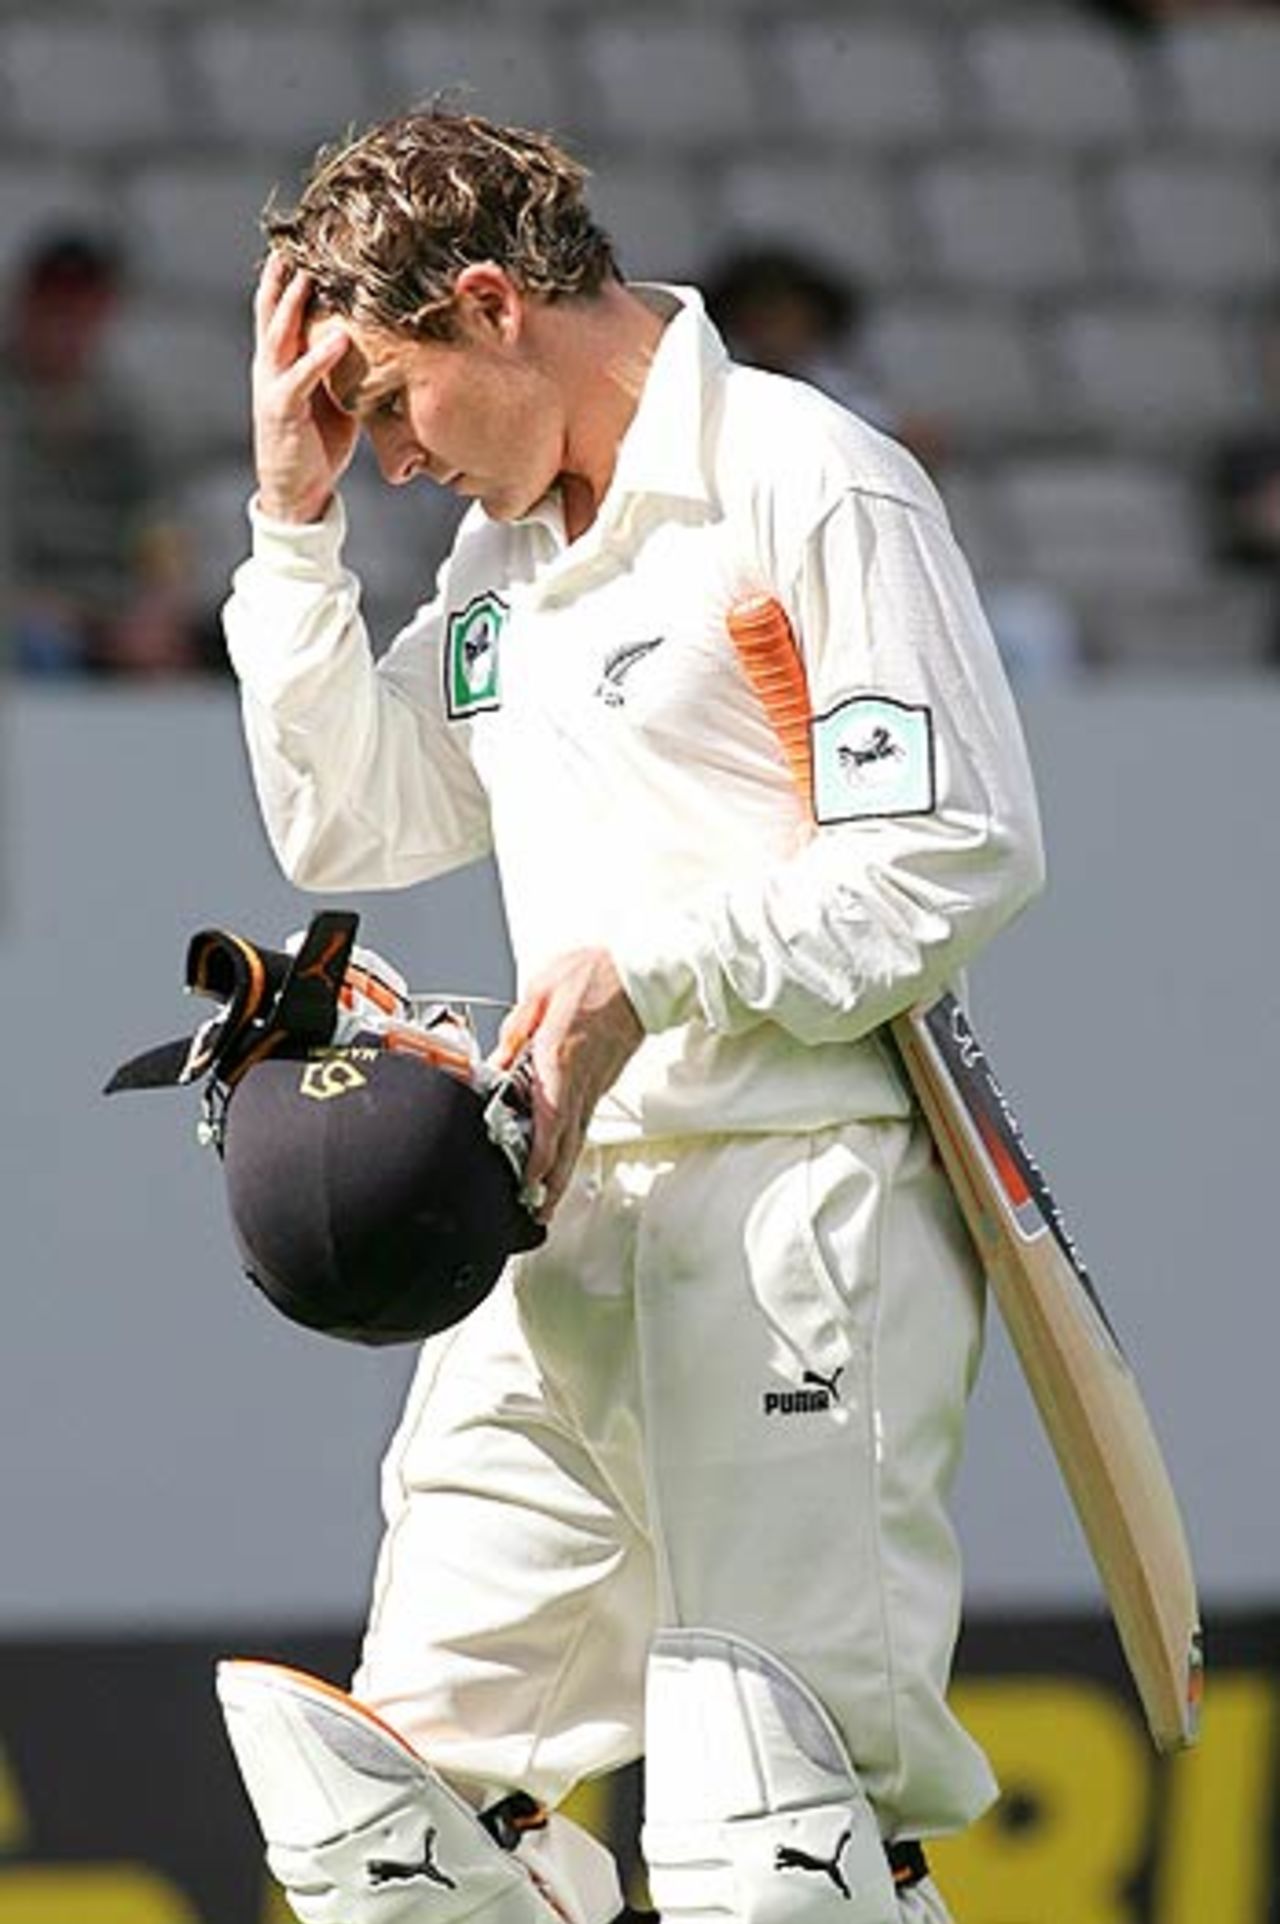 Brendon McCullum walks back after scoring an impressive half-century, New Zealand v West Indies, 1st Test, Auckland, 3rd day, March 11 2006